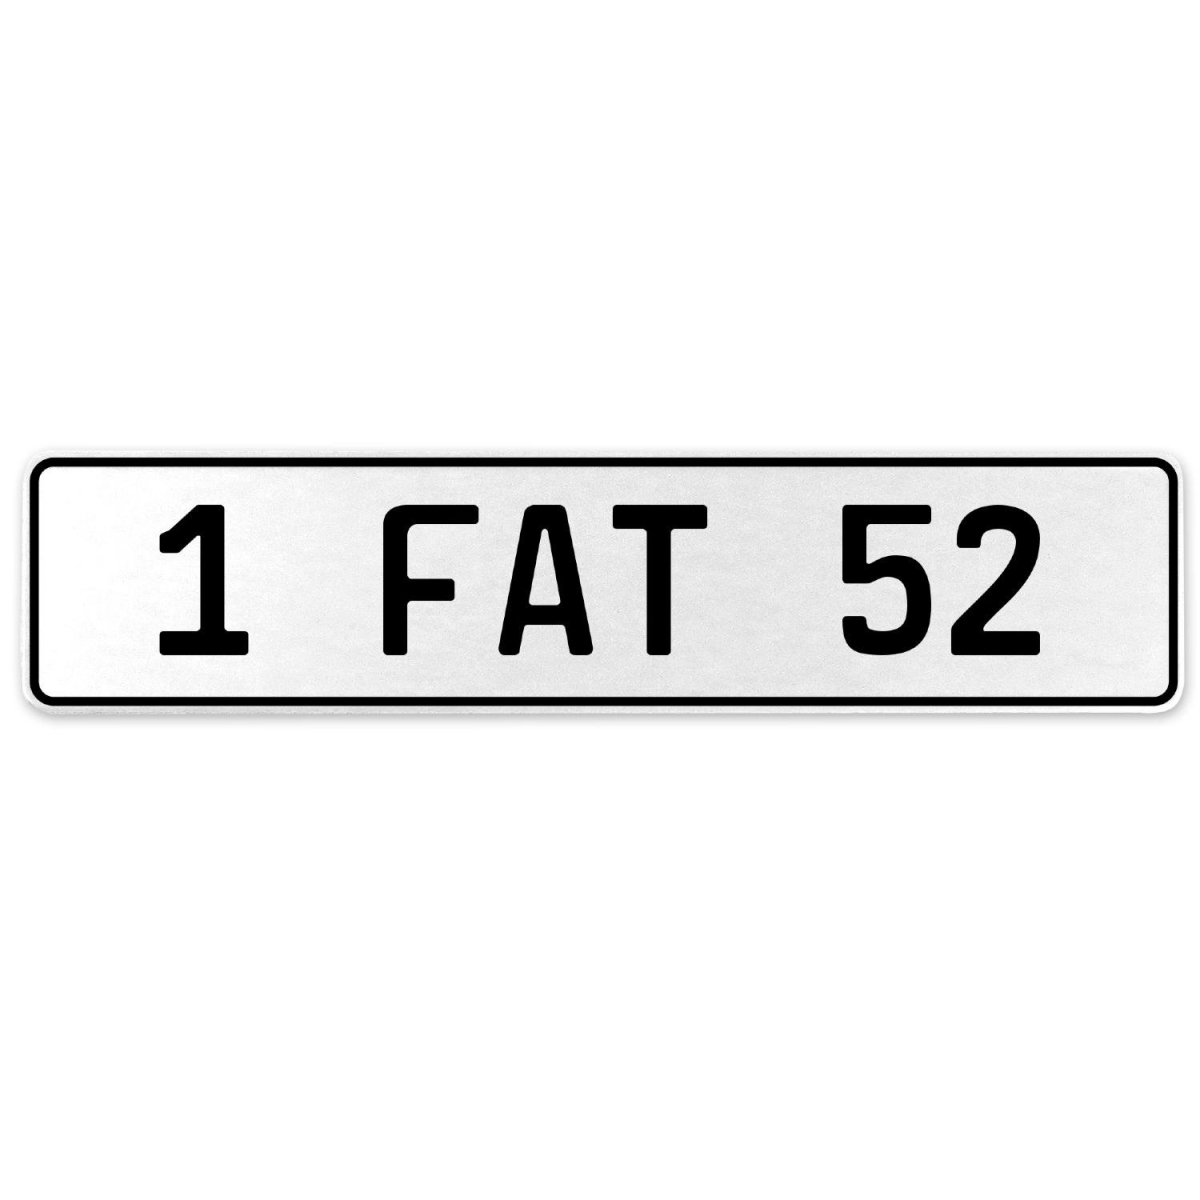 554649 1 Fat 52 - White Aluminum Street Sign Mancave Euro Plate Name Door Sign Wall